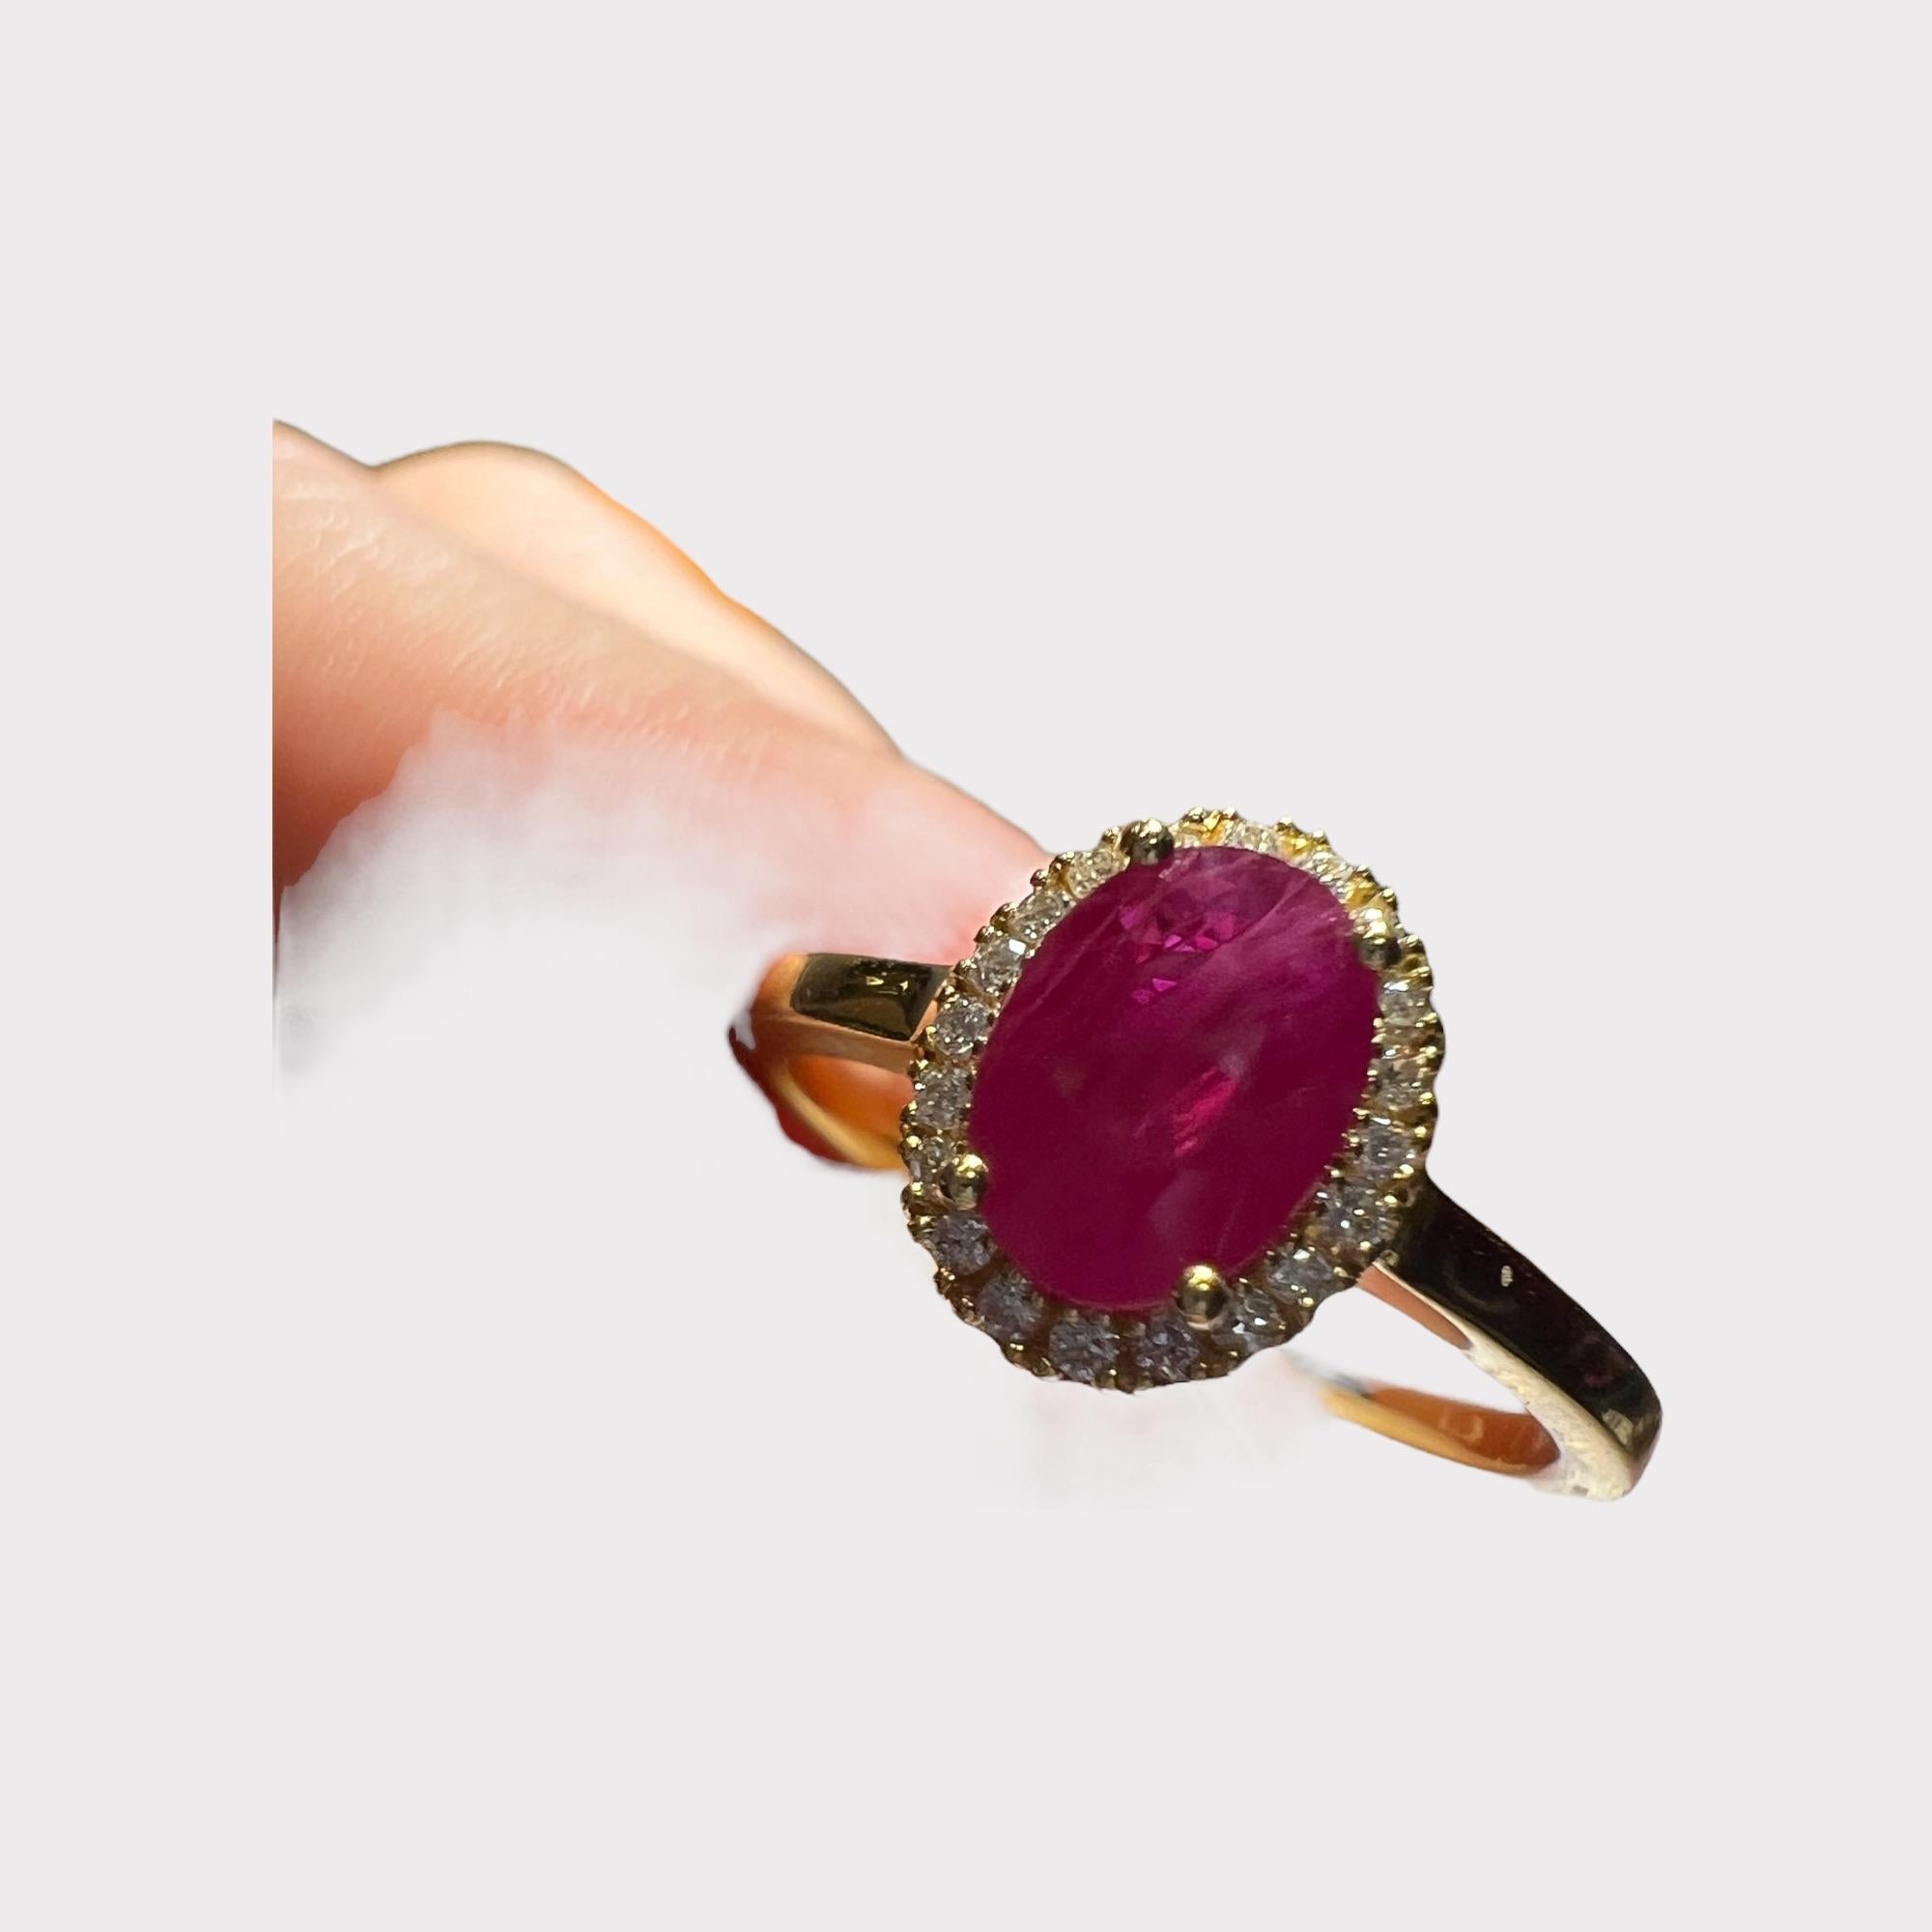 Art Deco 18-Carat Gold Ring, Set with a Ruby in Its Center, Paved with Brilliants